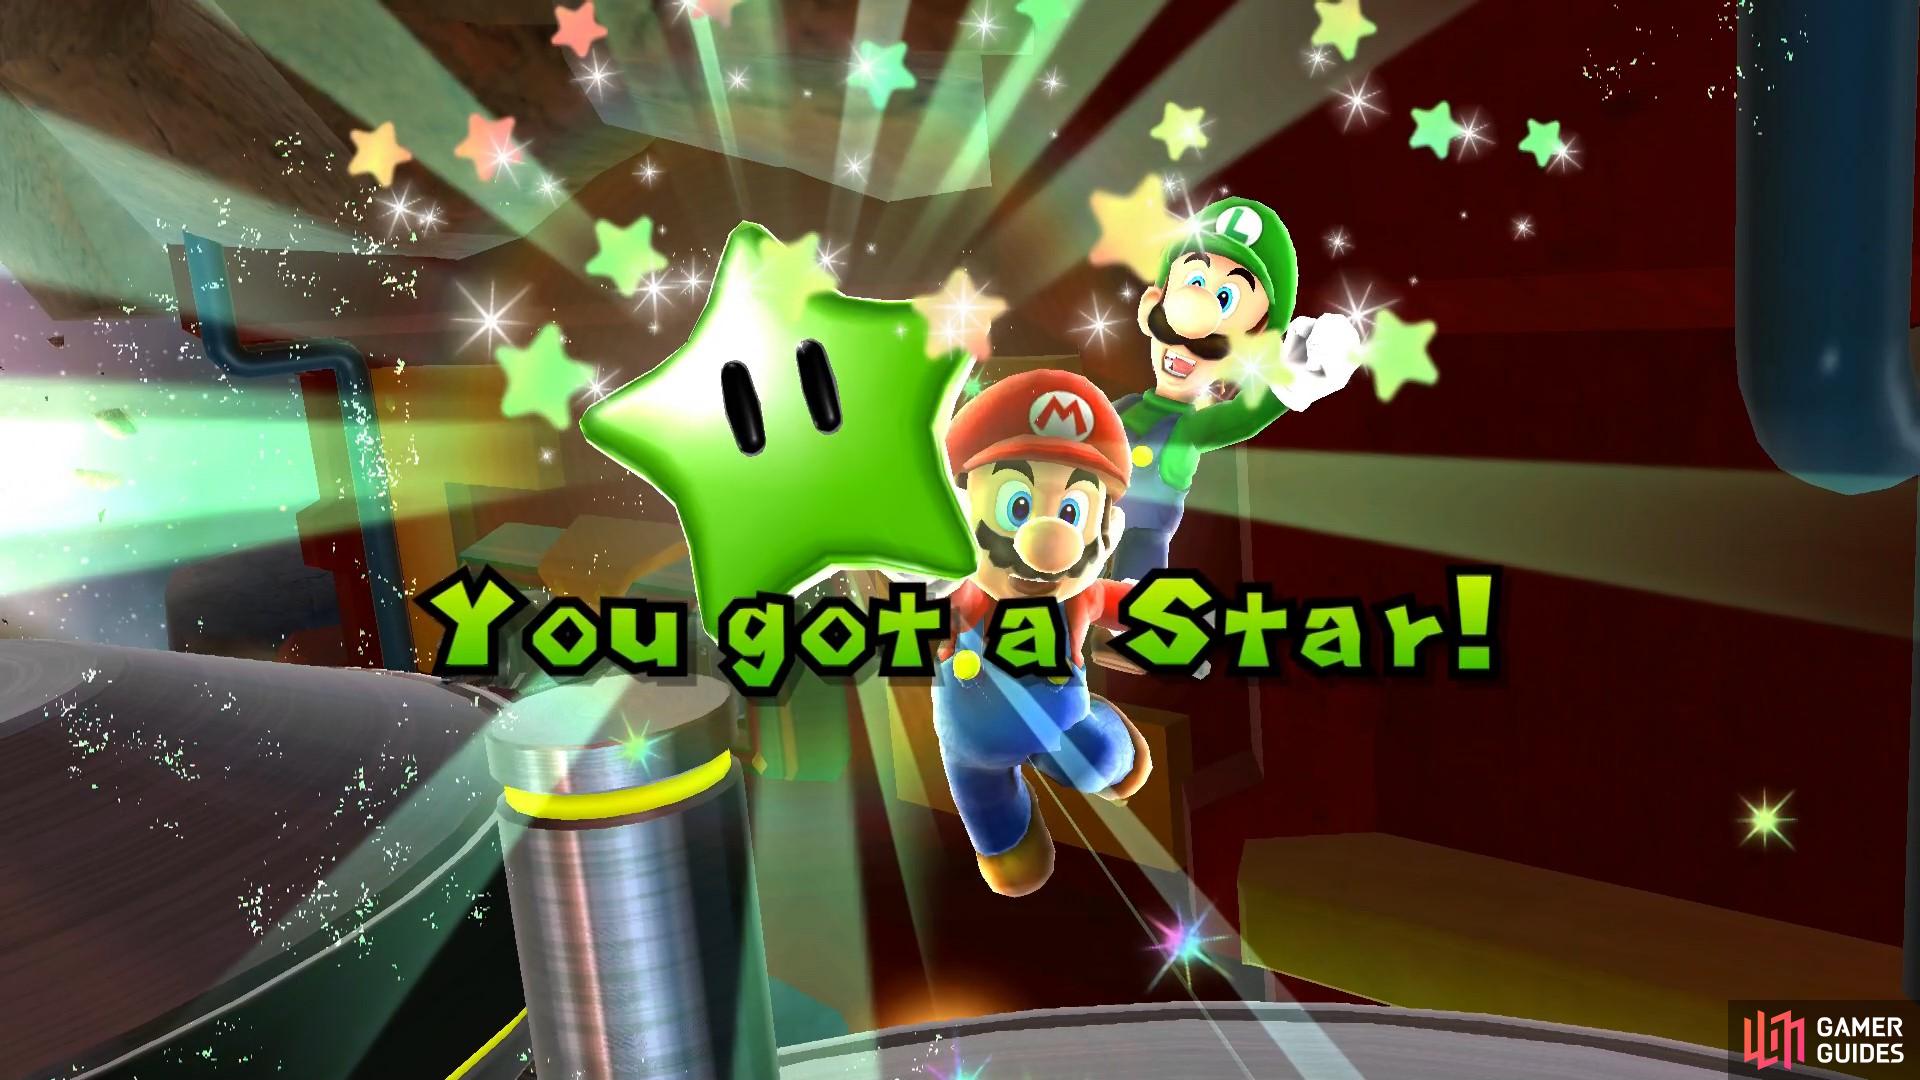 Free Luigi and he'll give you a rare Green Star!